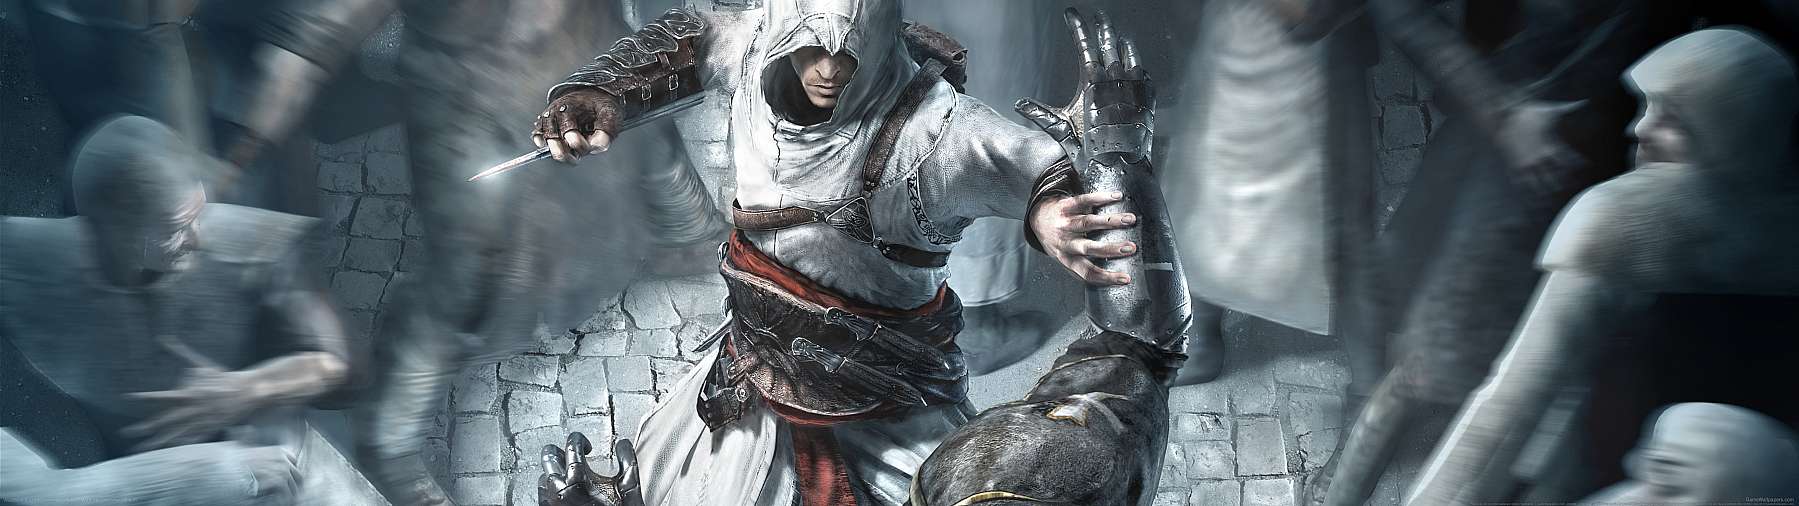 Assassin's Creed superwide wallpaper or background 15